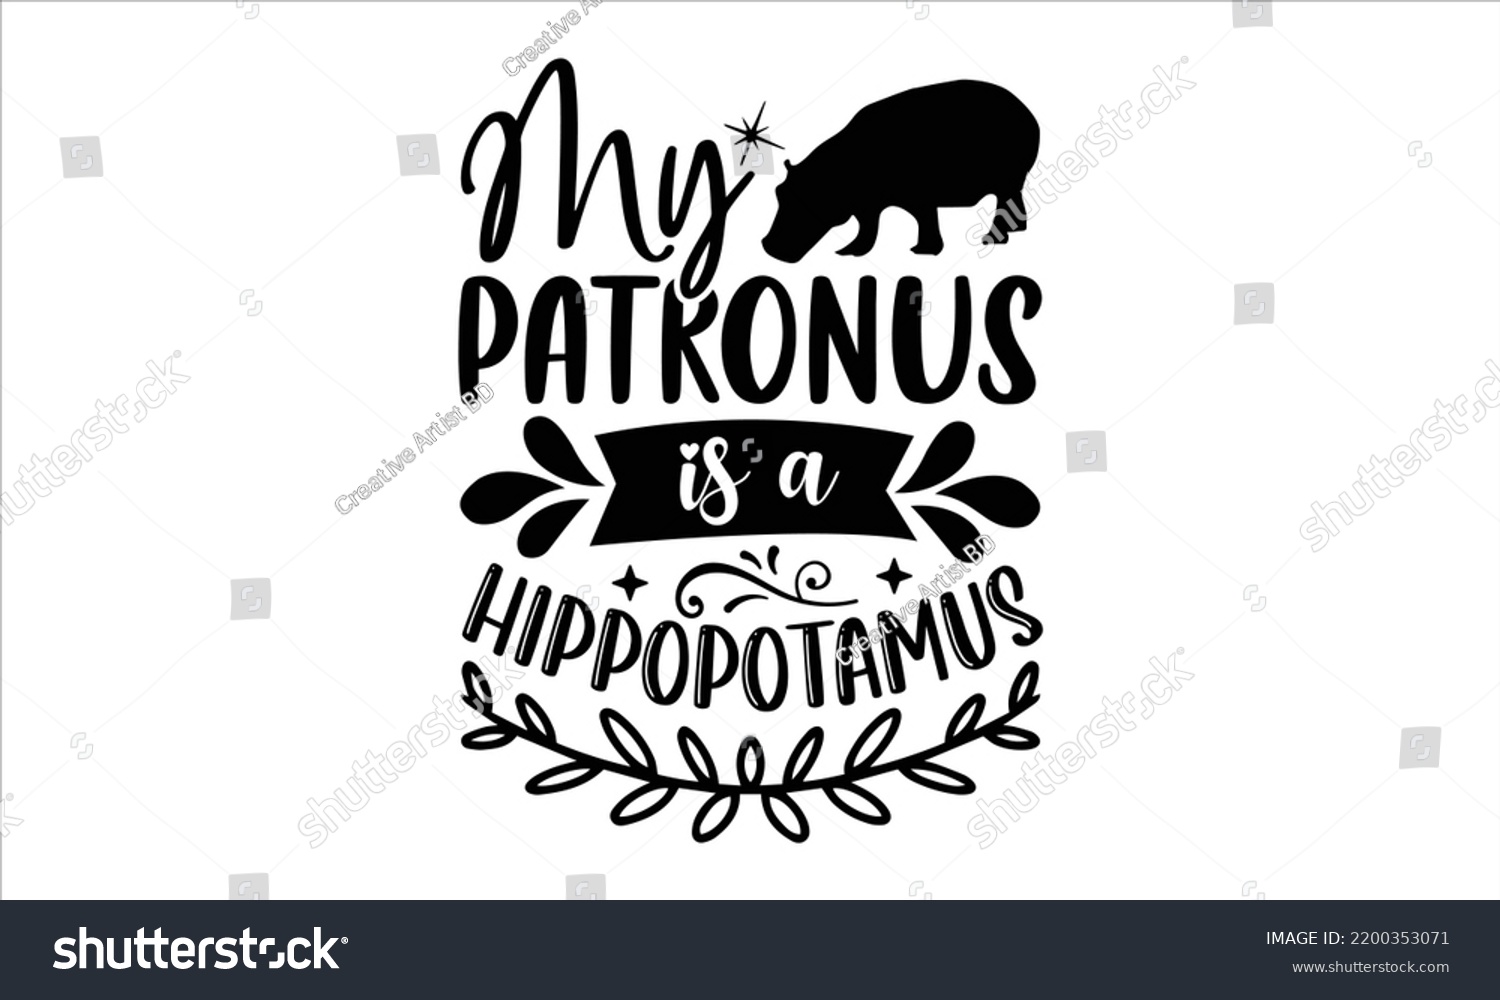 SVG of My Patronus Is A Hippopotamus - Hippo T shirt Design, Hand drawn vintage illustration with hand-lettering and decoration elements, Cut Files for Cricut Svg, Digital Download svg